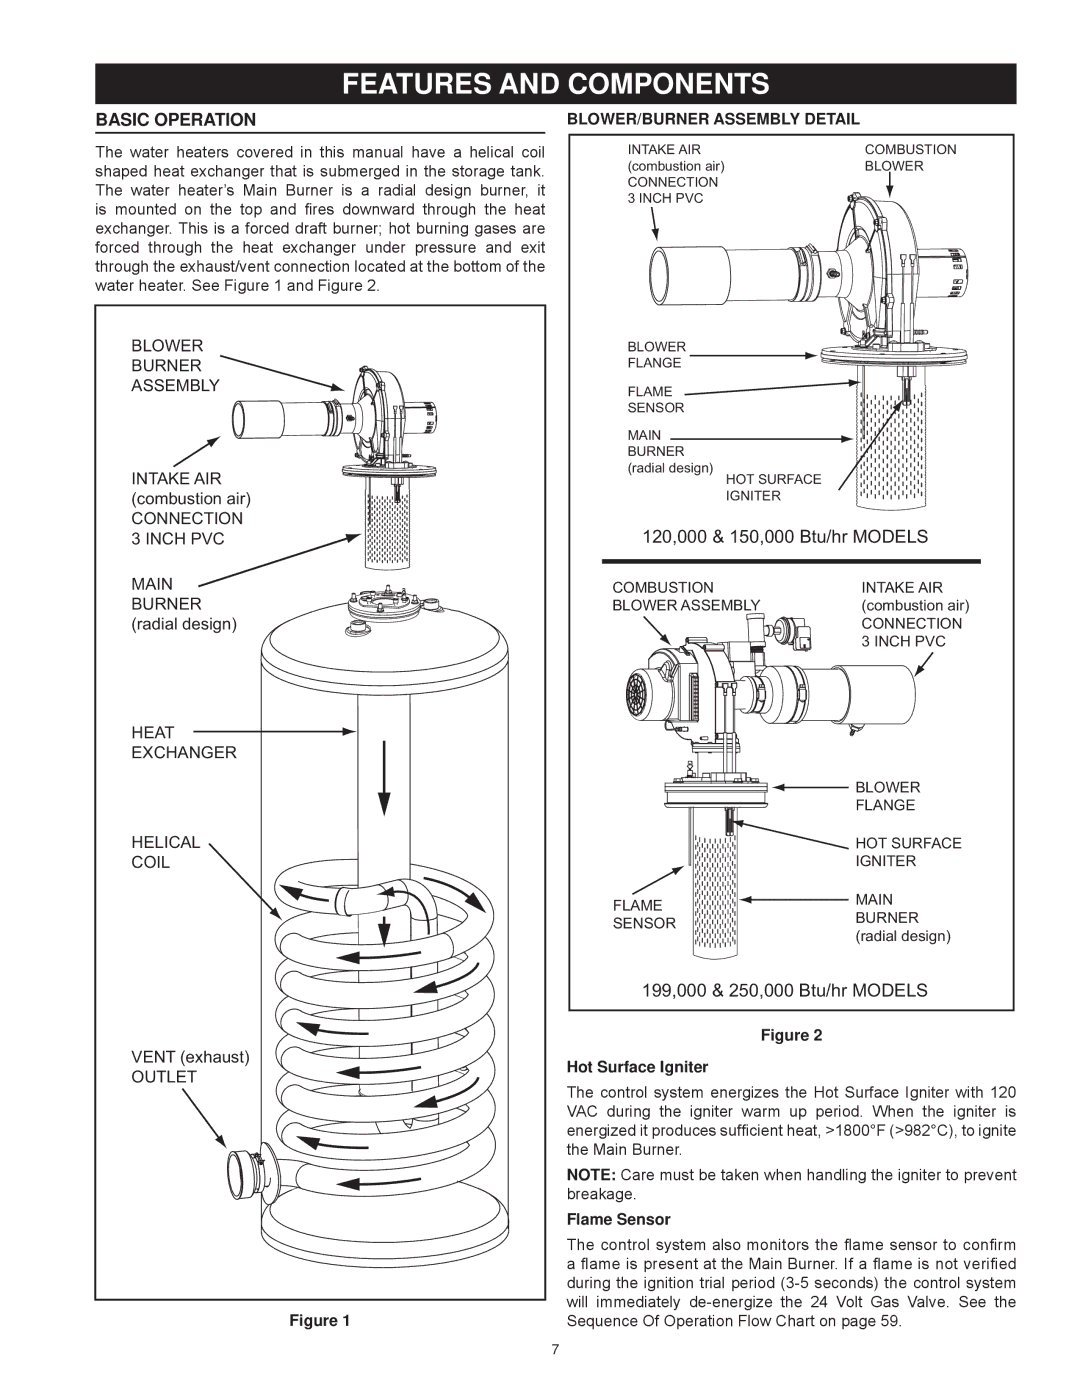 American Water Heater Commercial Gas Water Heaters instruction manual Features and Components, Basic Operation 